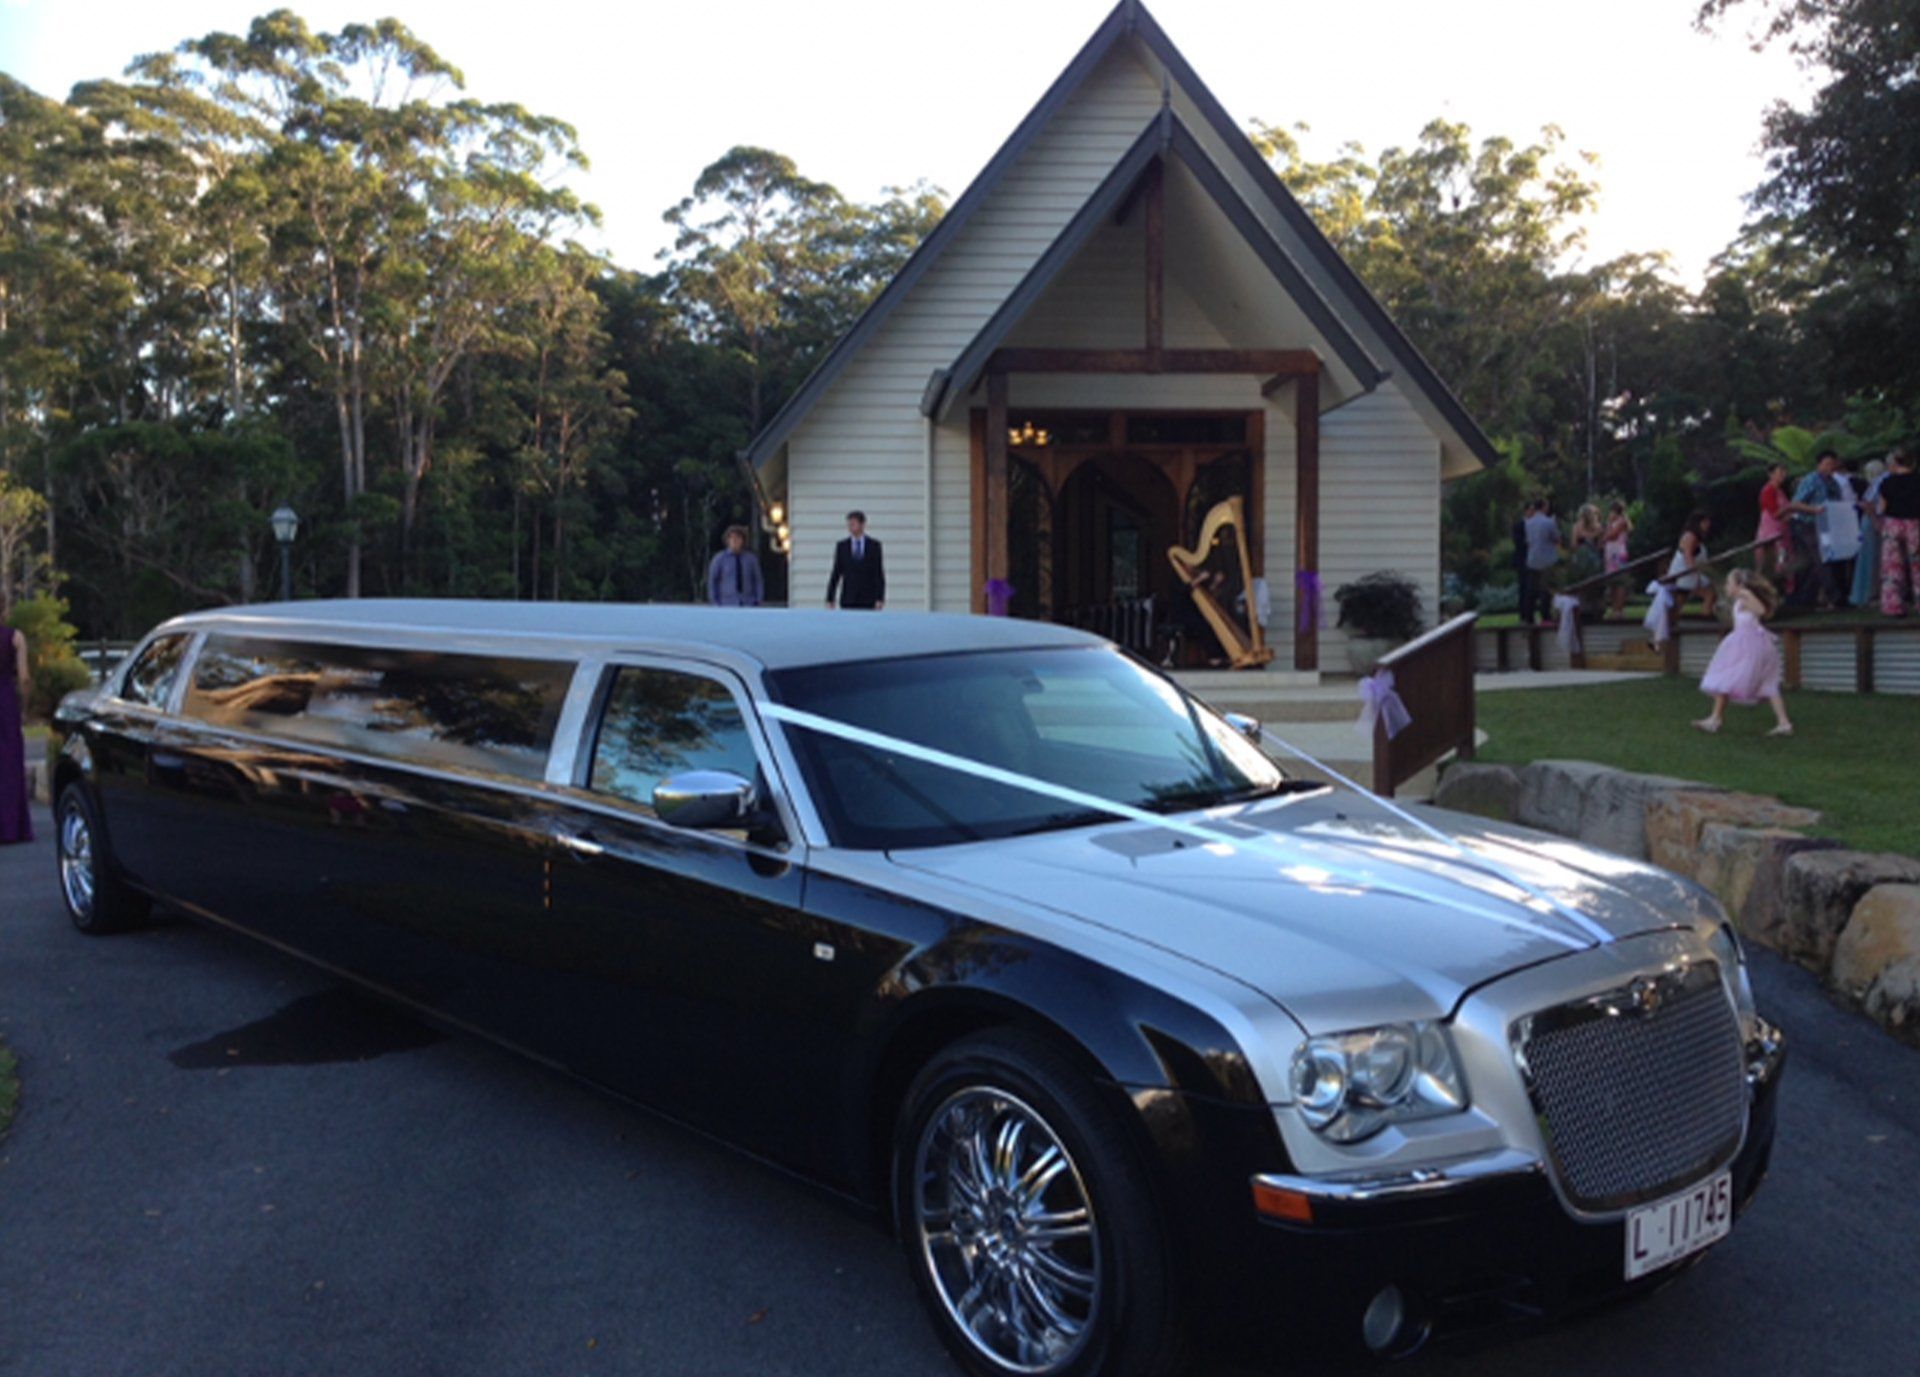 Black Limousine — Superstretch300 Limousines in Golden Beach, QLD